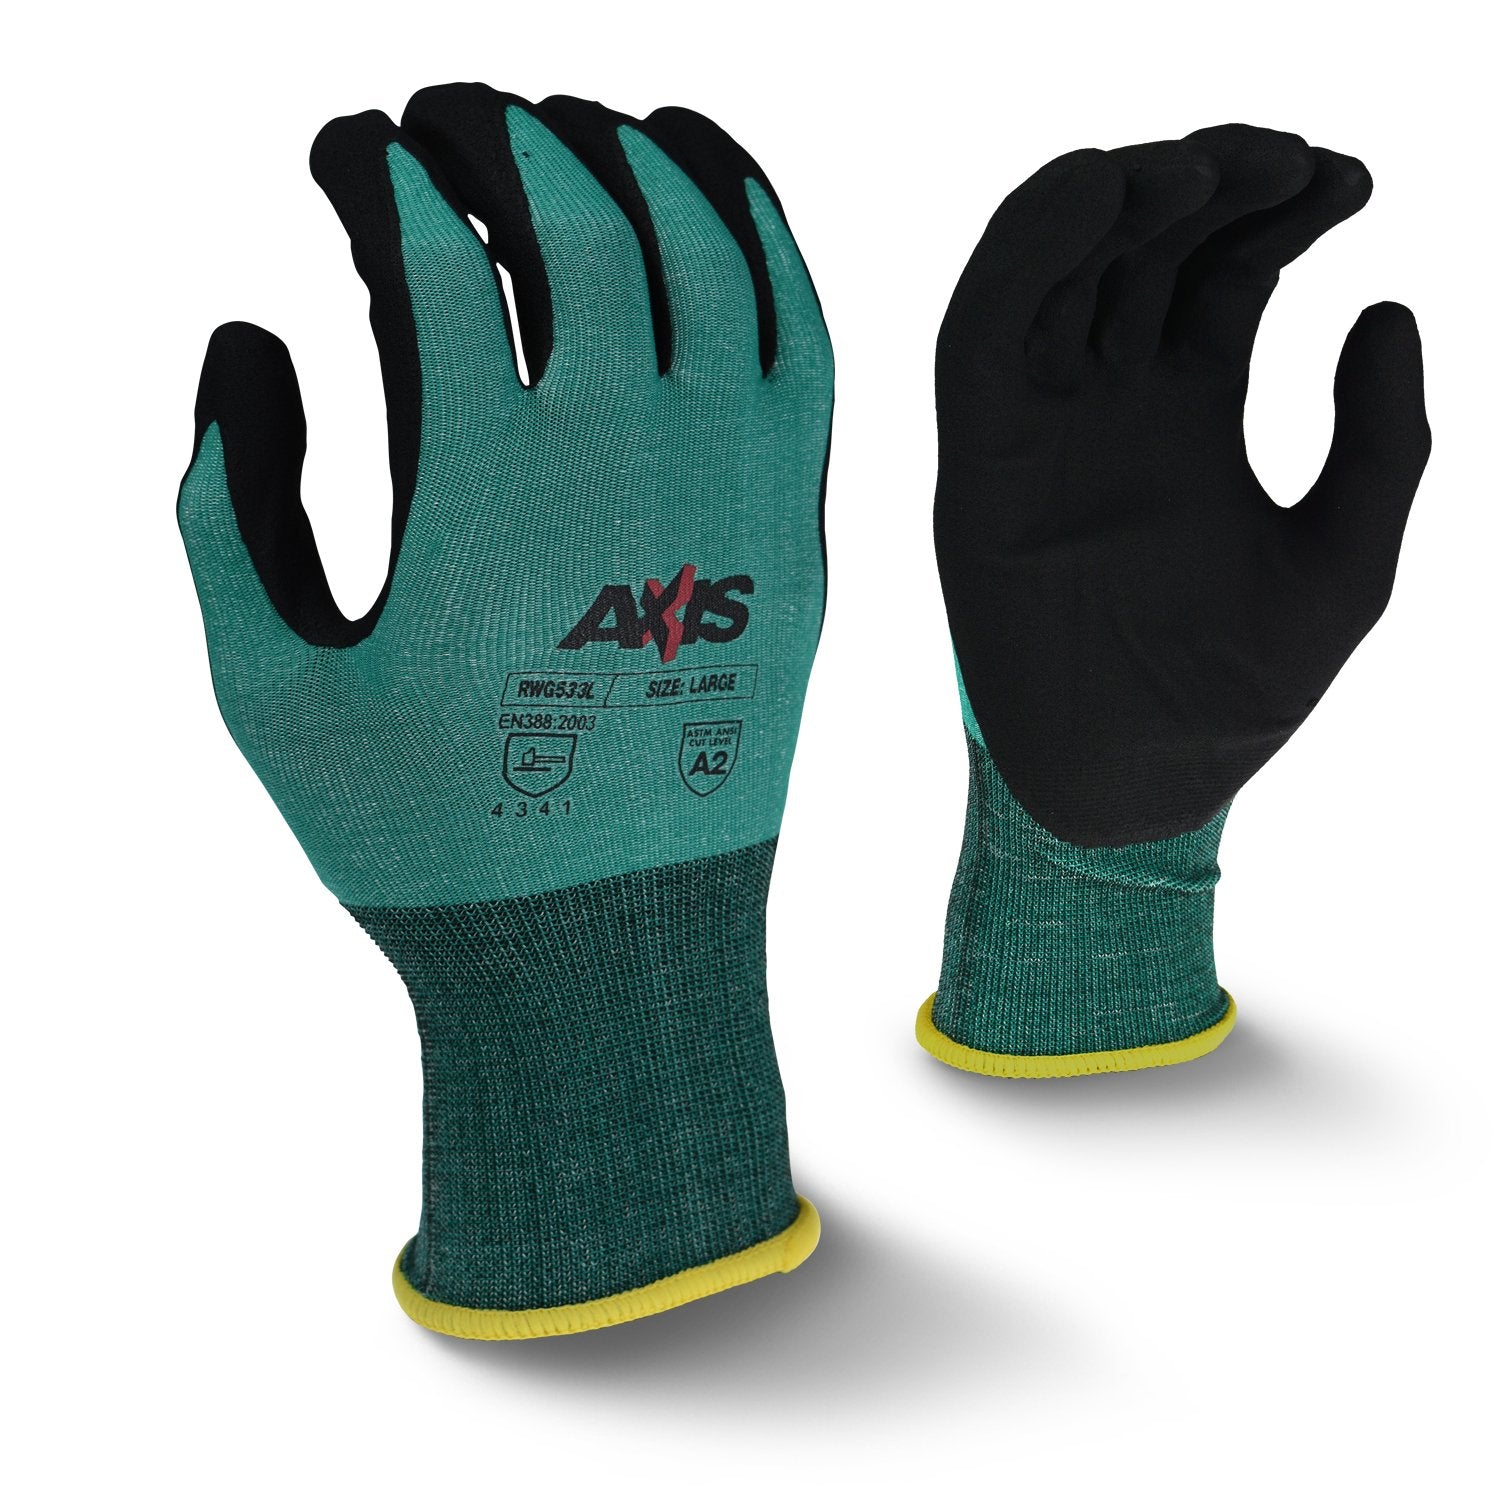 Large Axis Cut Protection Level 2 Nitrile Coated Glove